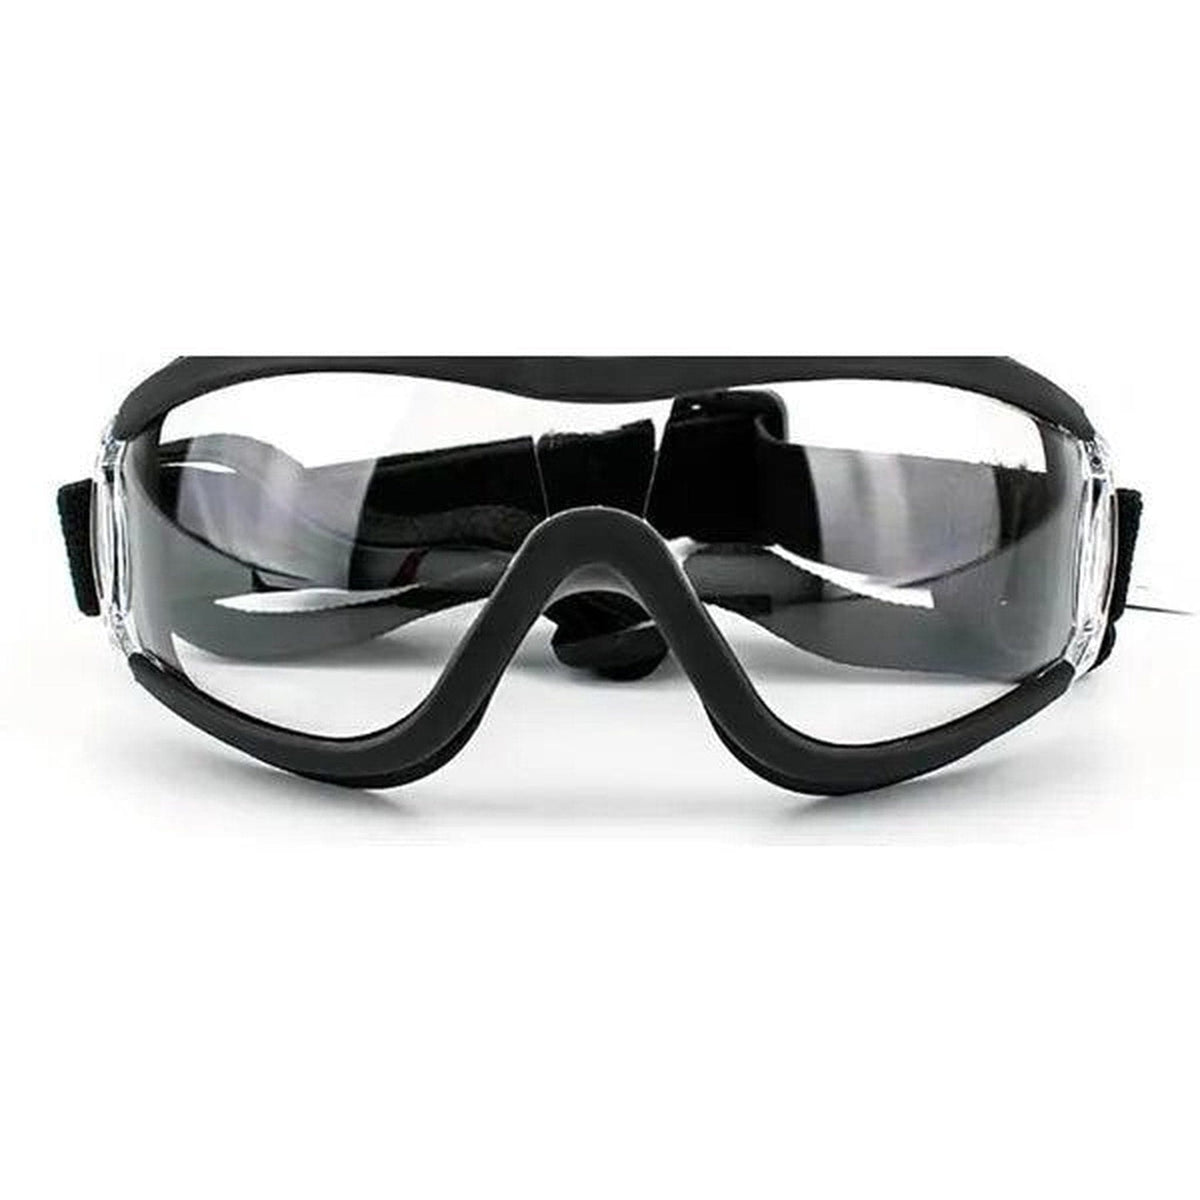 A black safety goggles with UV protection
Product Name: 🐕 Sporty UV Protective Large Dog Goggles 🕶️
Brand Name: Pets Paradise